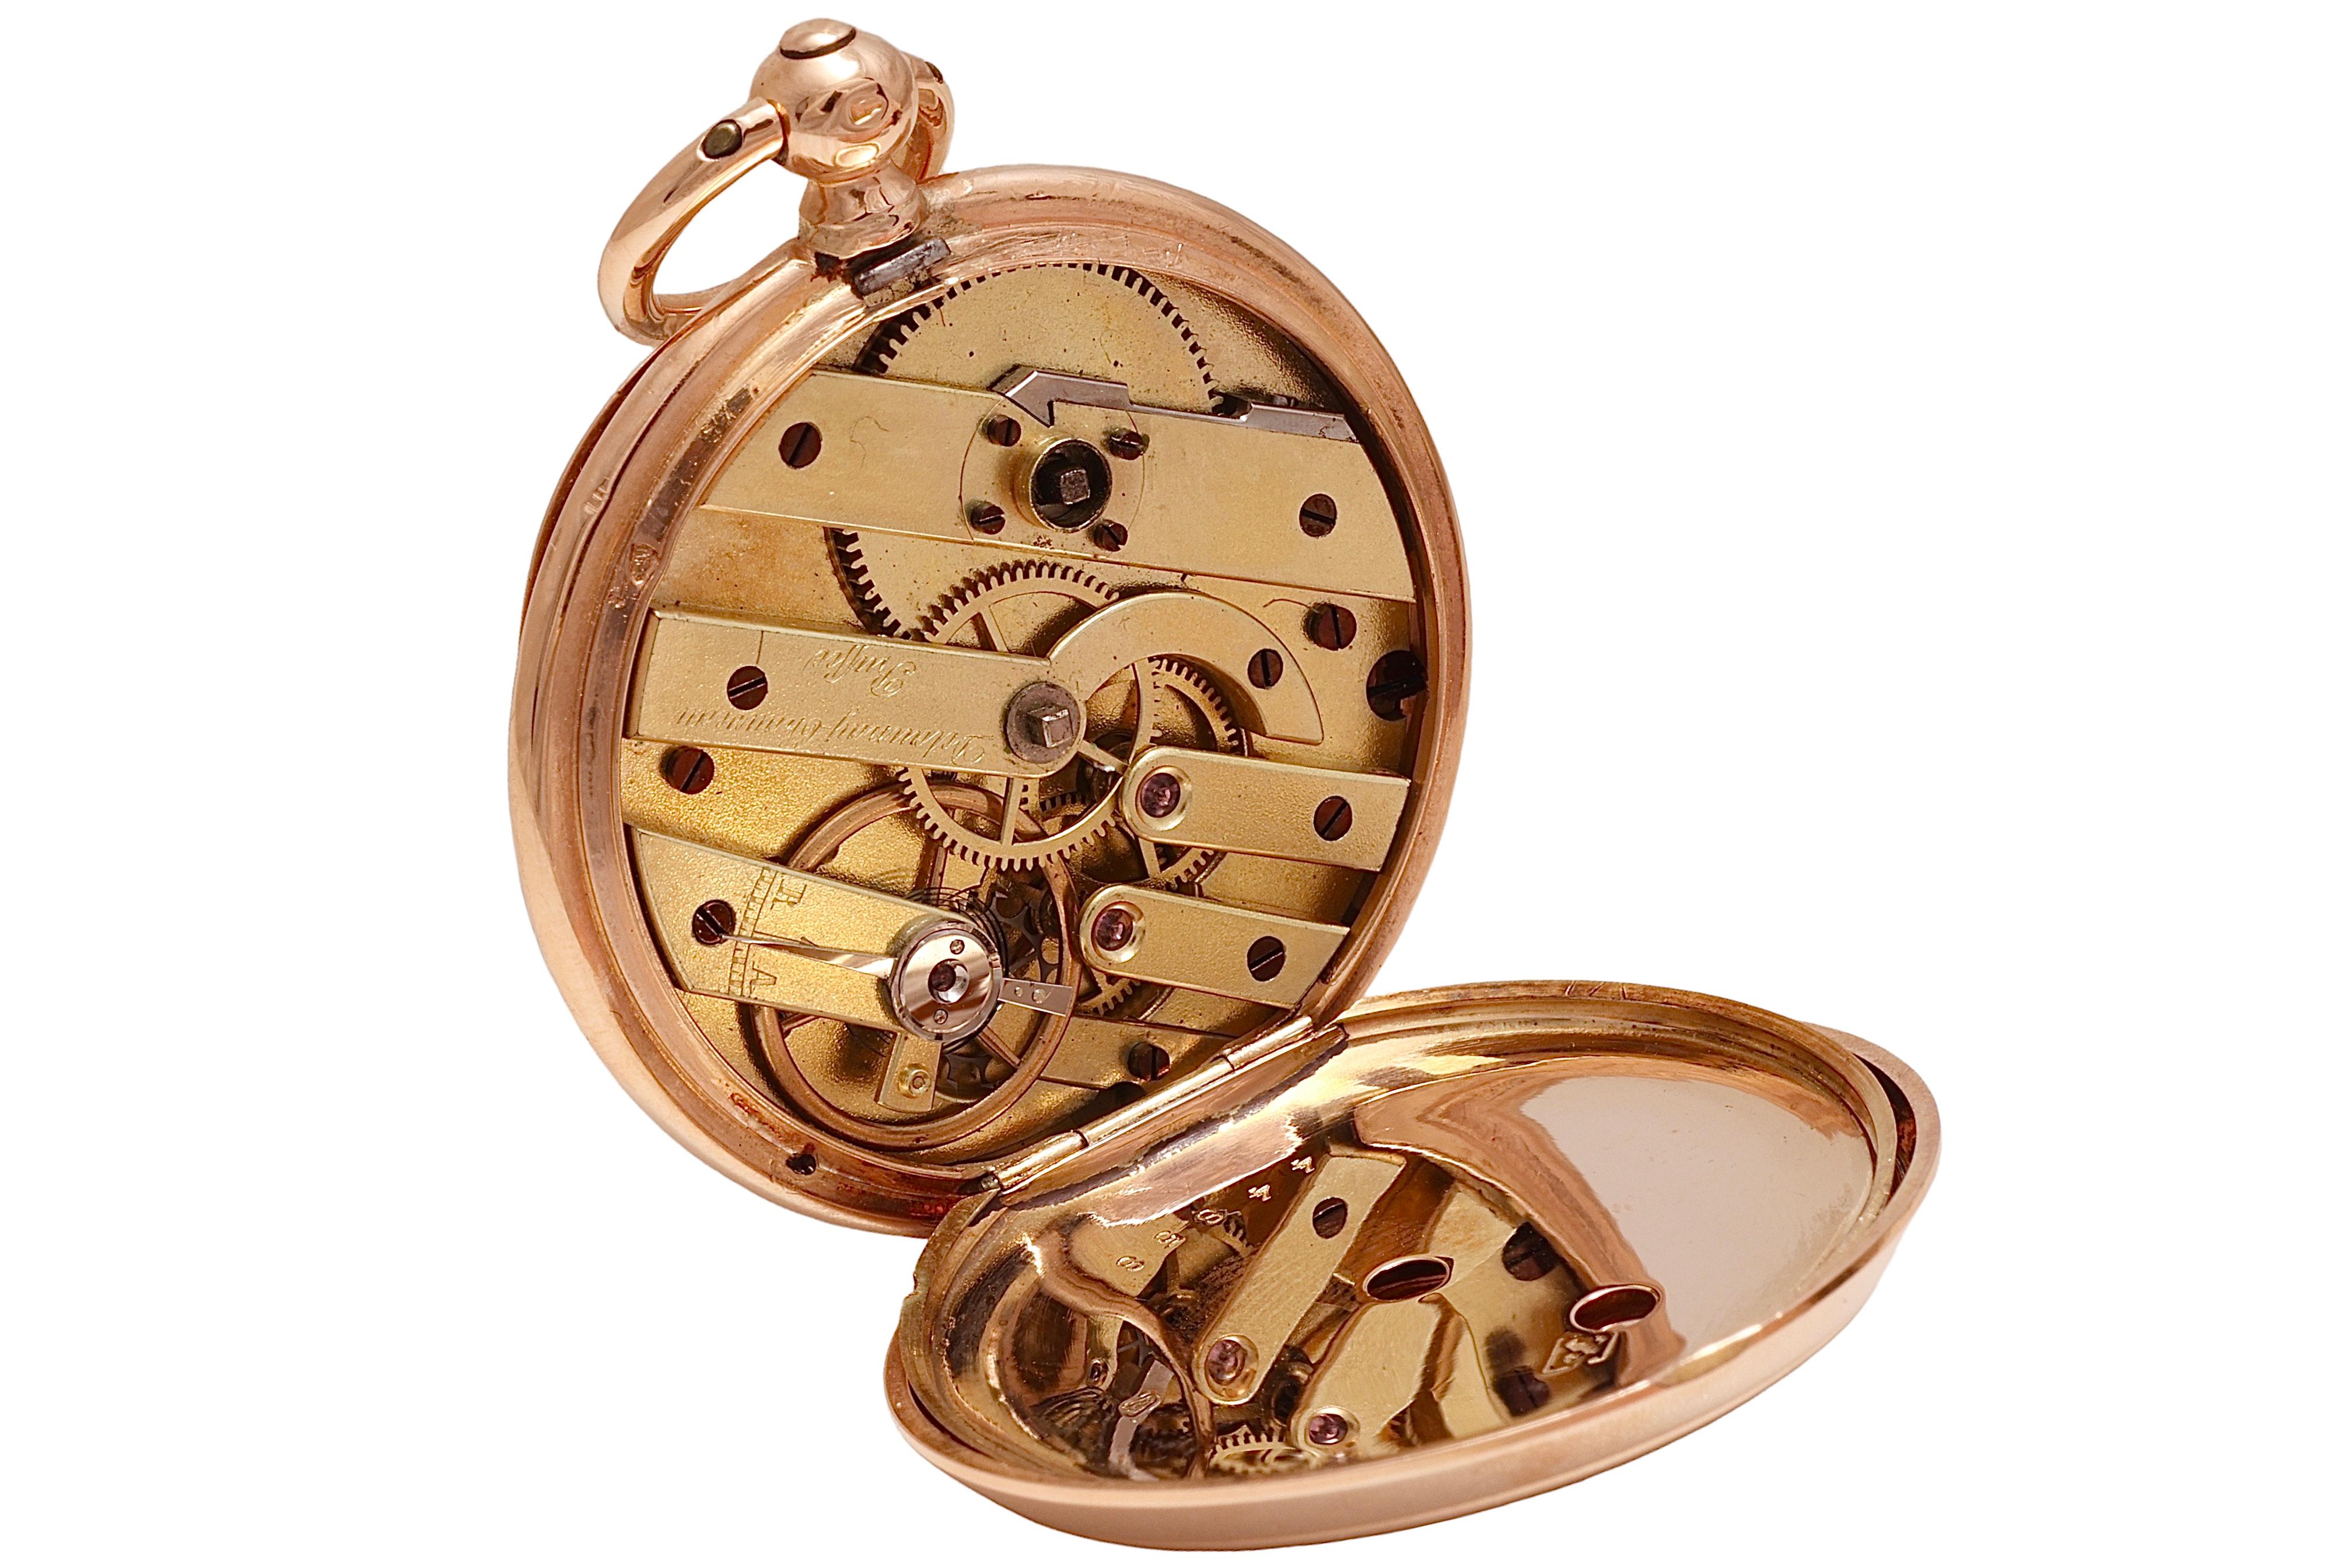 14 Kt Solid Pink Gold Delaunay Chauveau Ruffec pocket watch For Sale 1